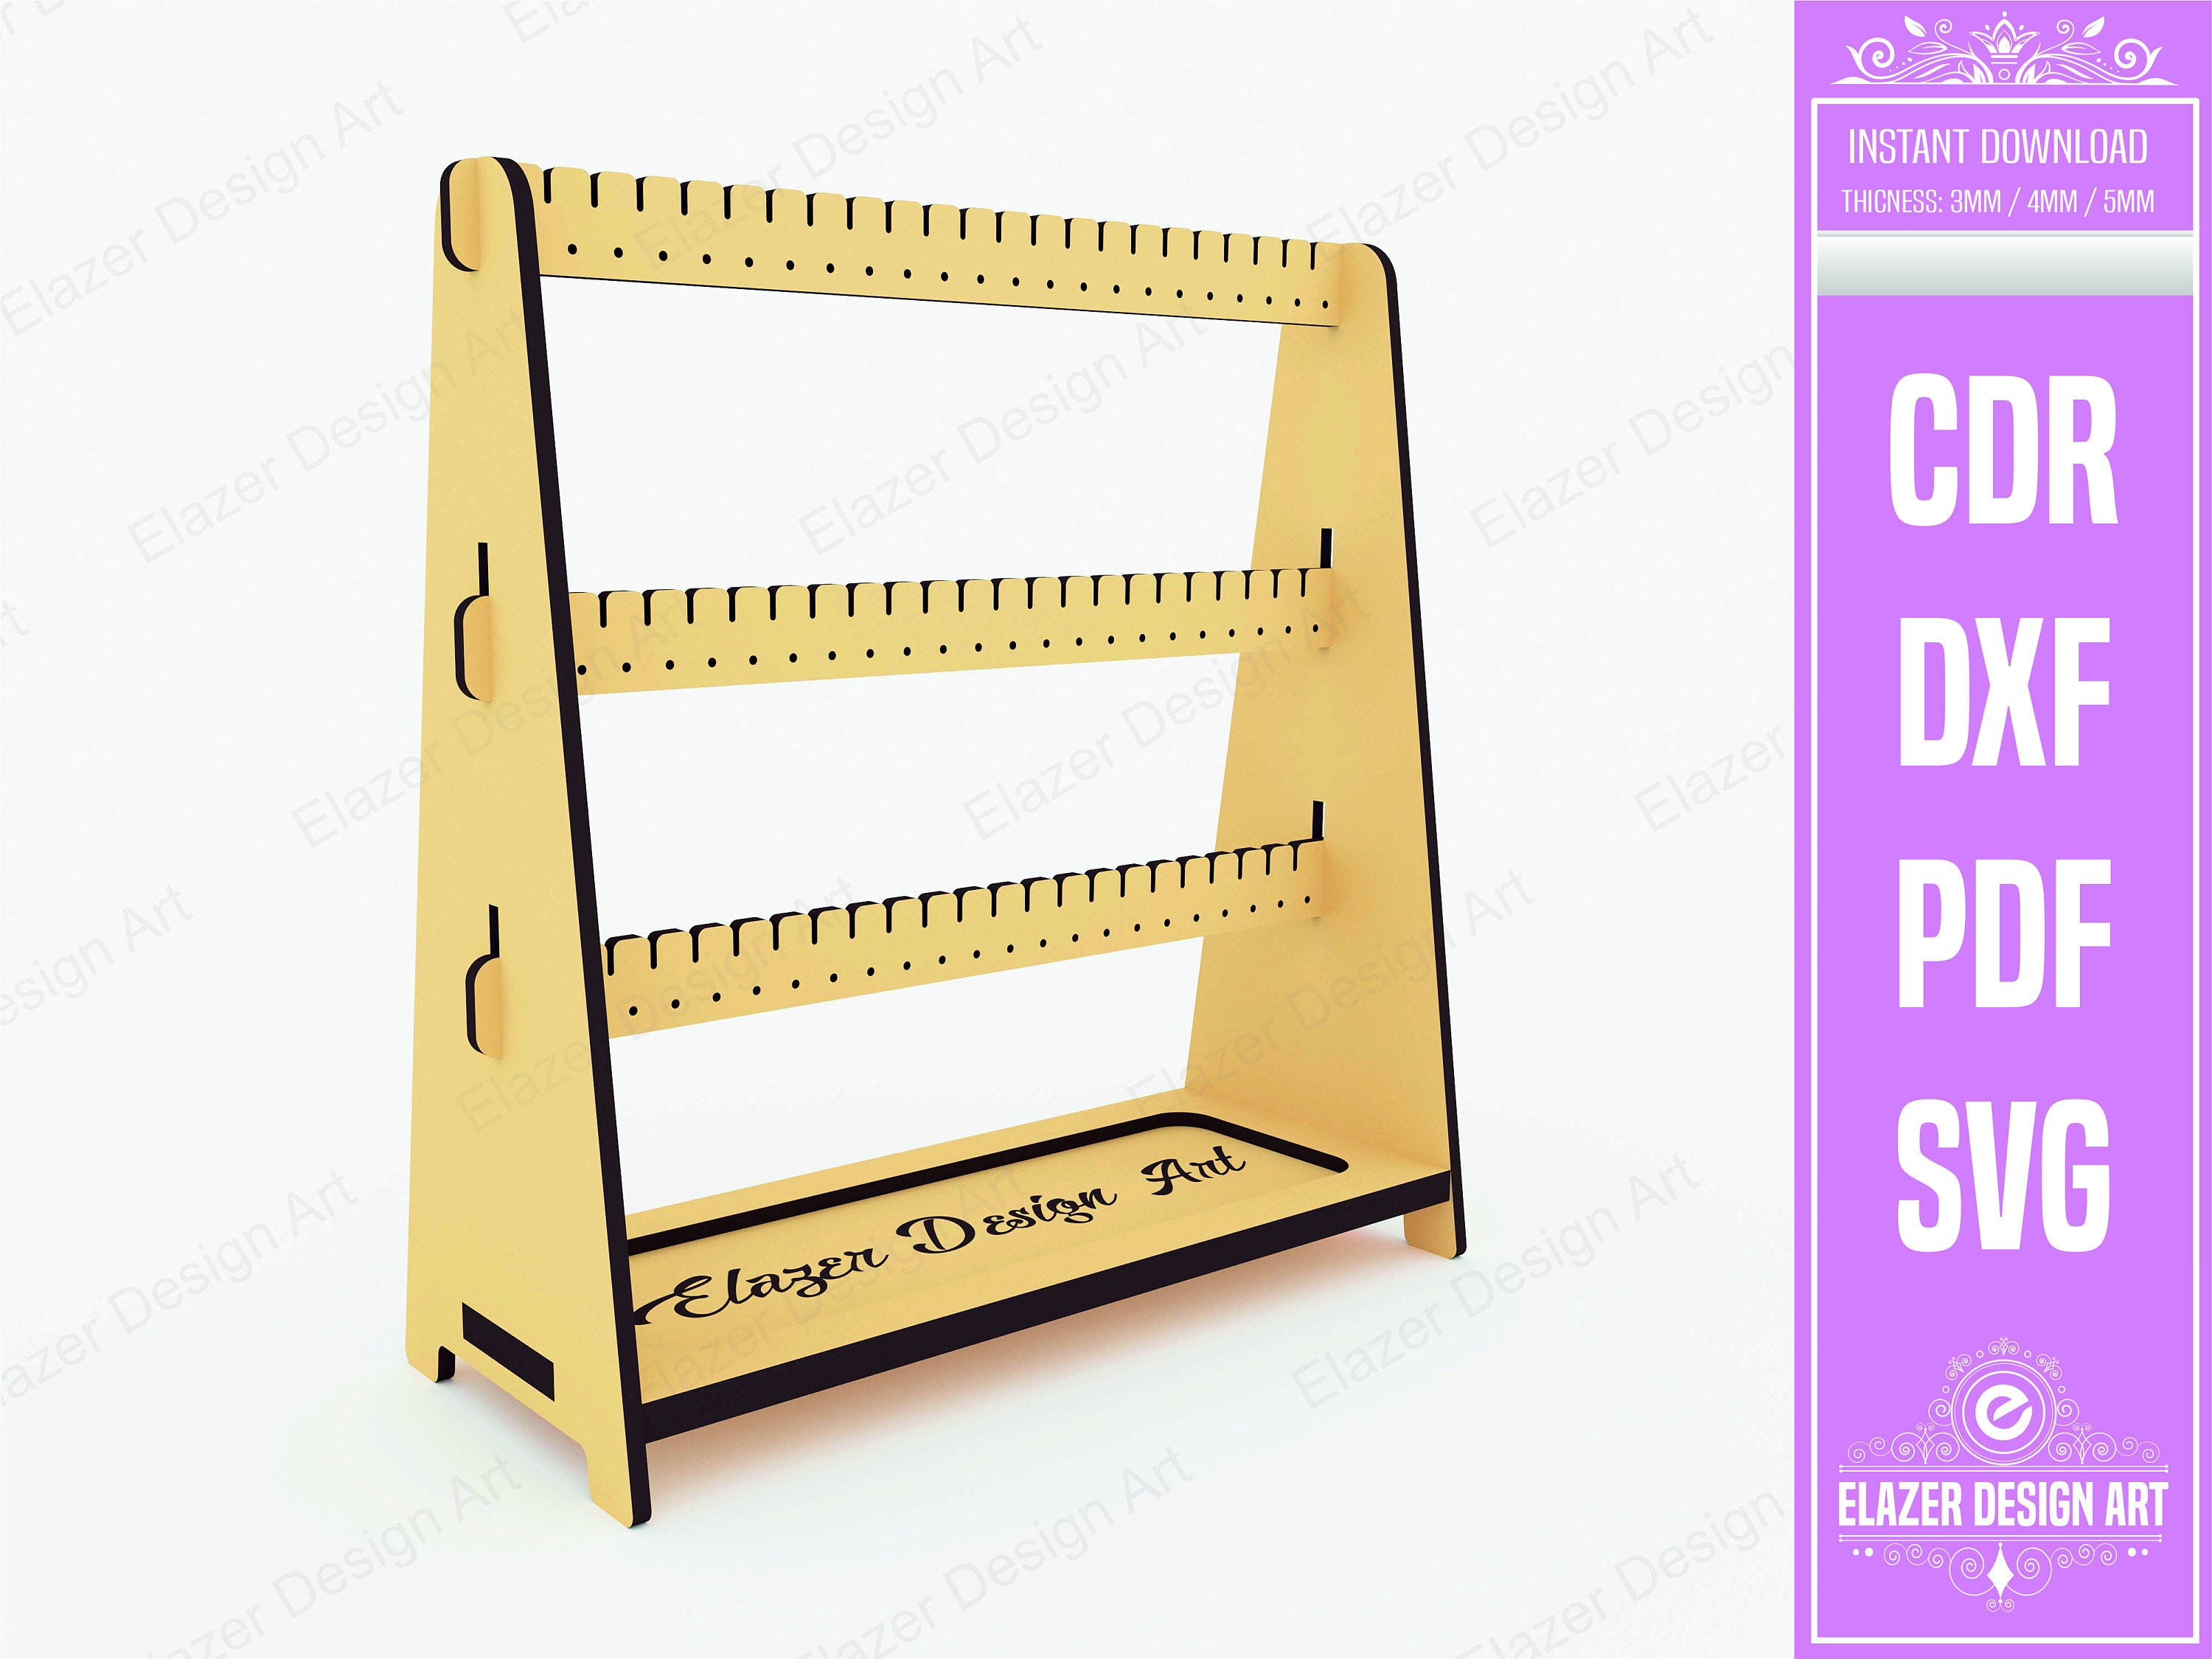 Double Arch Earring Stand SVG Laser Cut File for Glowforge, Stud Earring  Holder, Minimalist Jewelry Display Stands for Earrings -  Norway